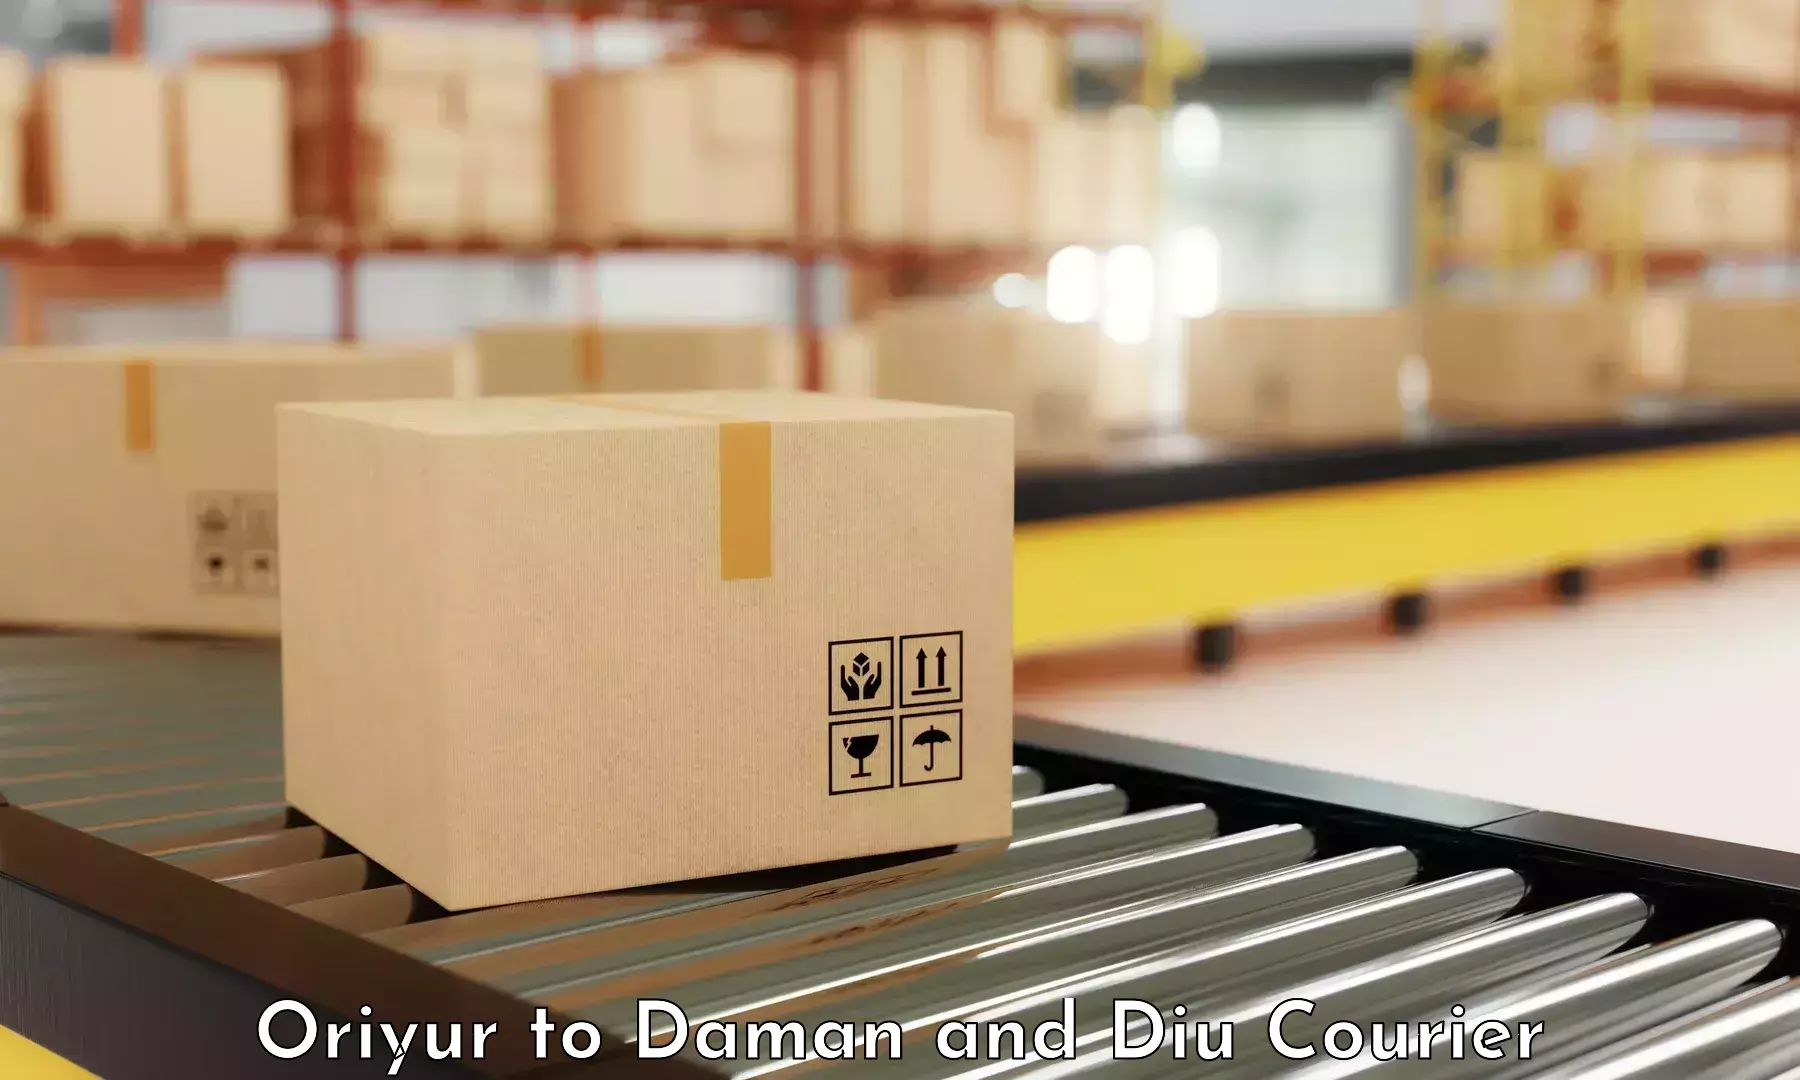 Rapid shipping services Oriyur to Diu